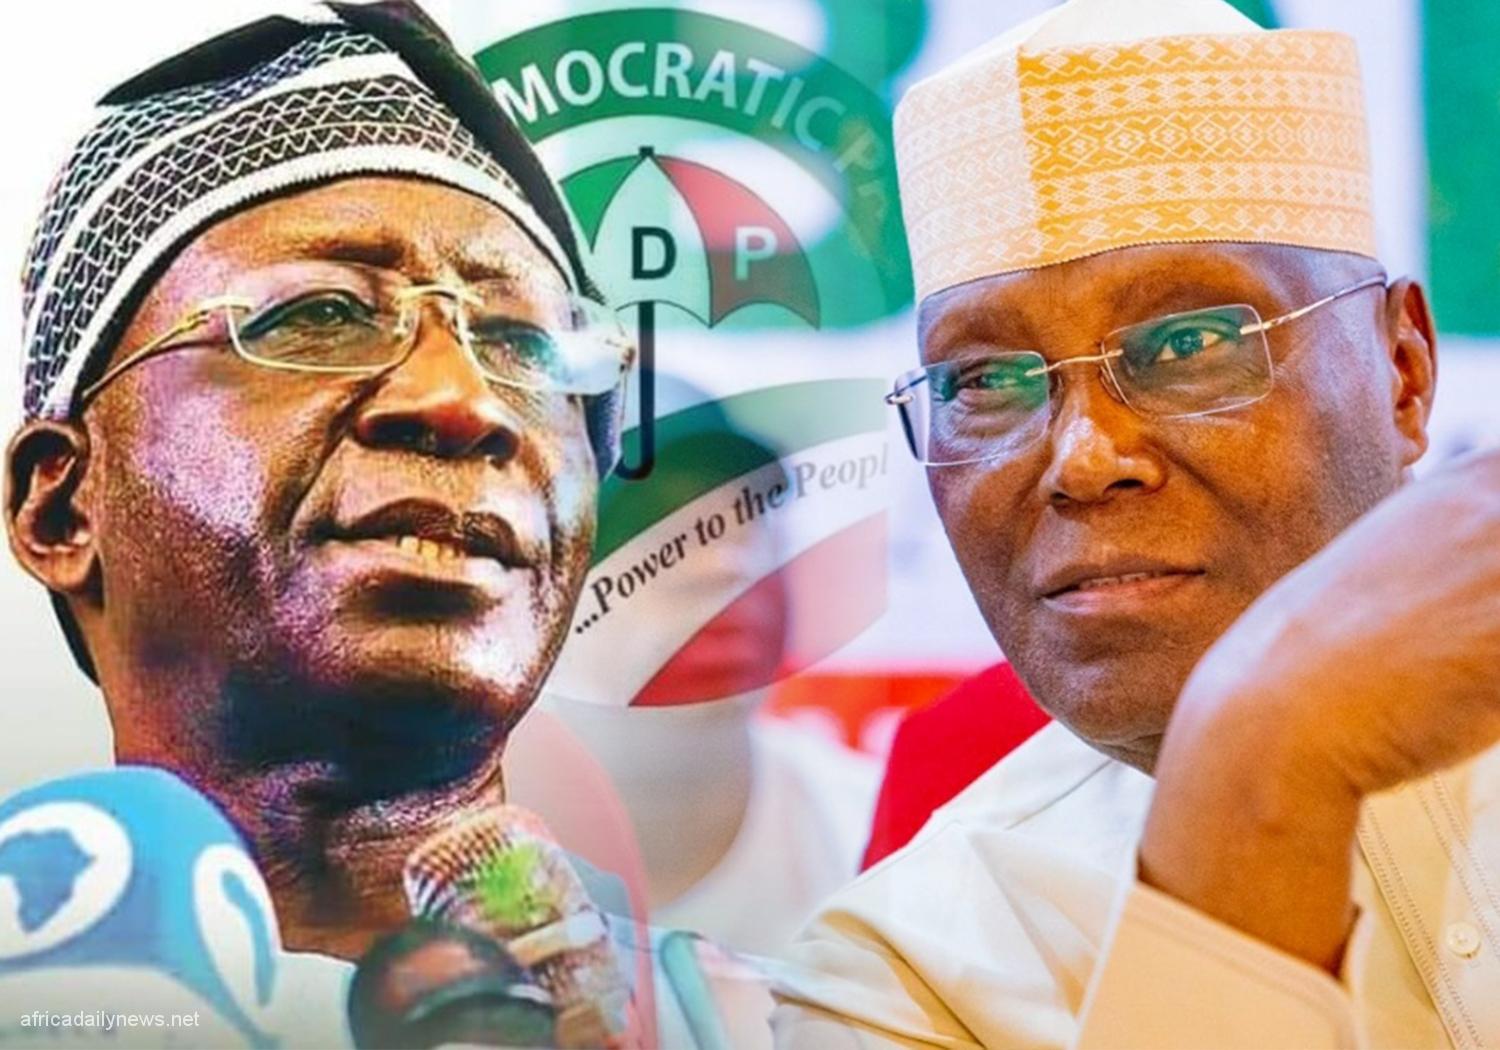 2023 Ayu’s Resignation Can Only Happen If.. – Atiku